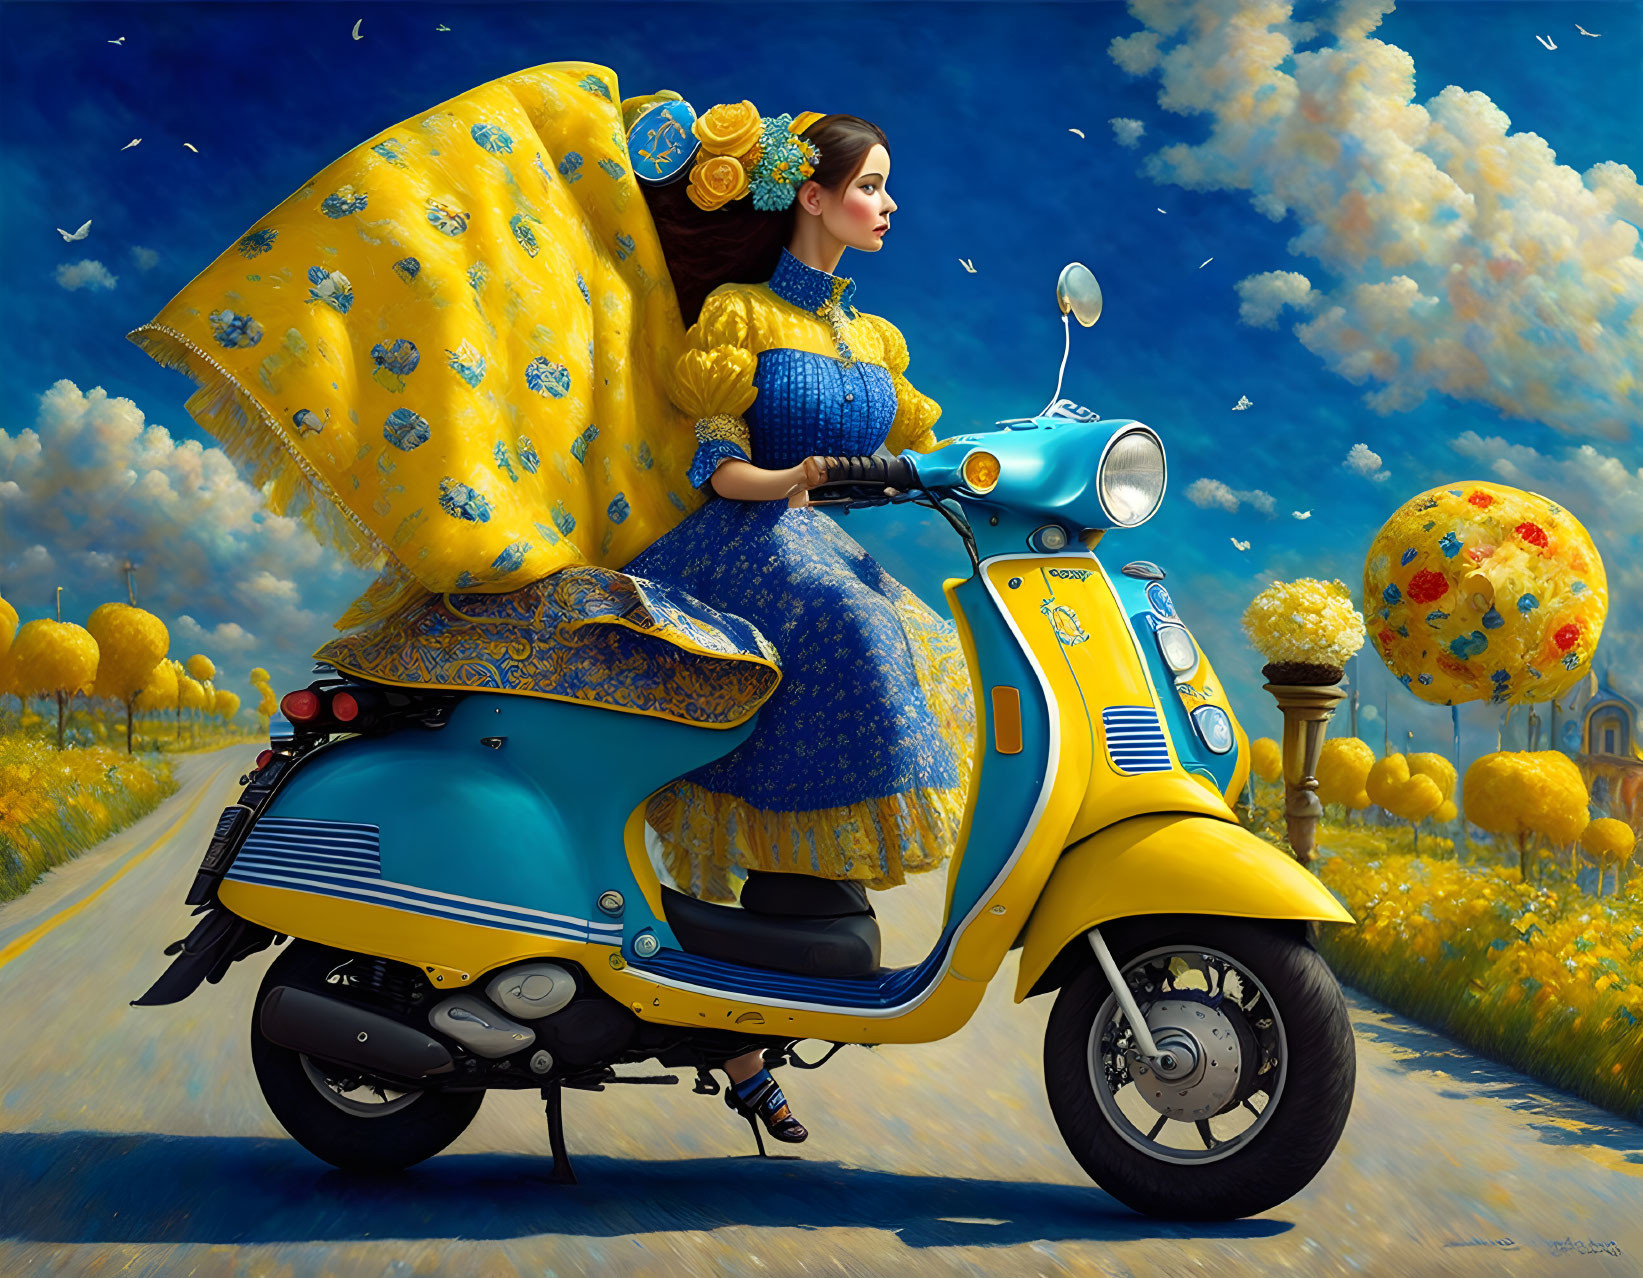 Woman in vibrant yellow and blue dress on classic blue scooter in whimsical setting